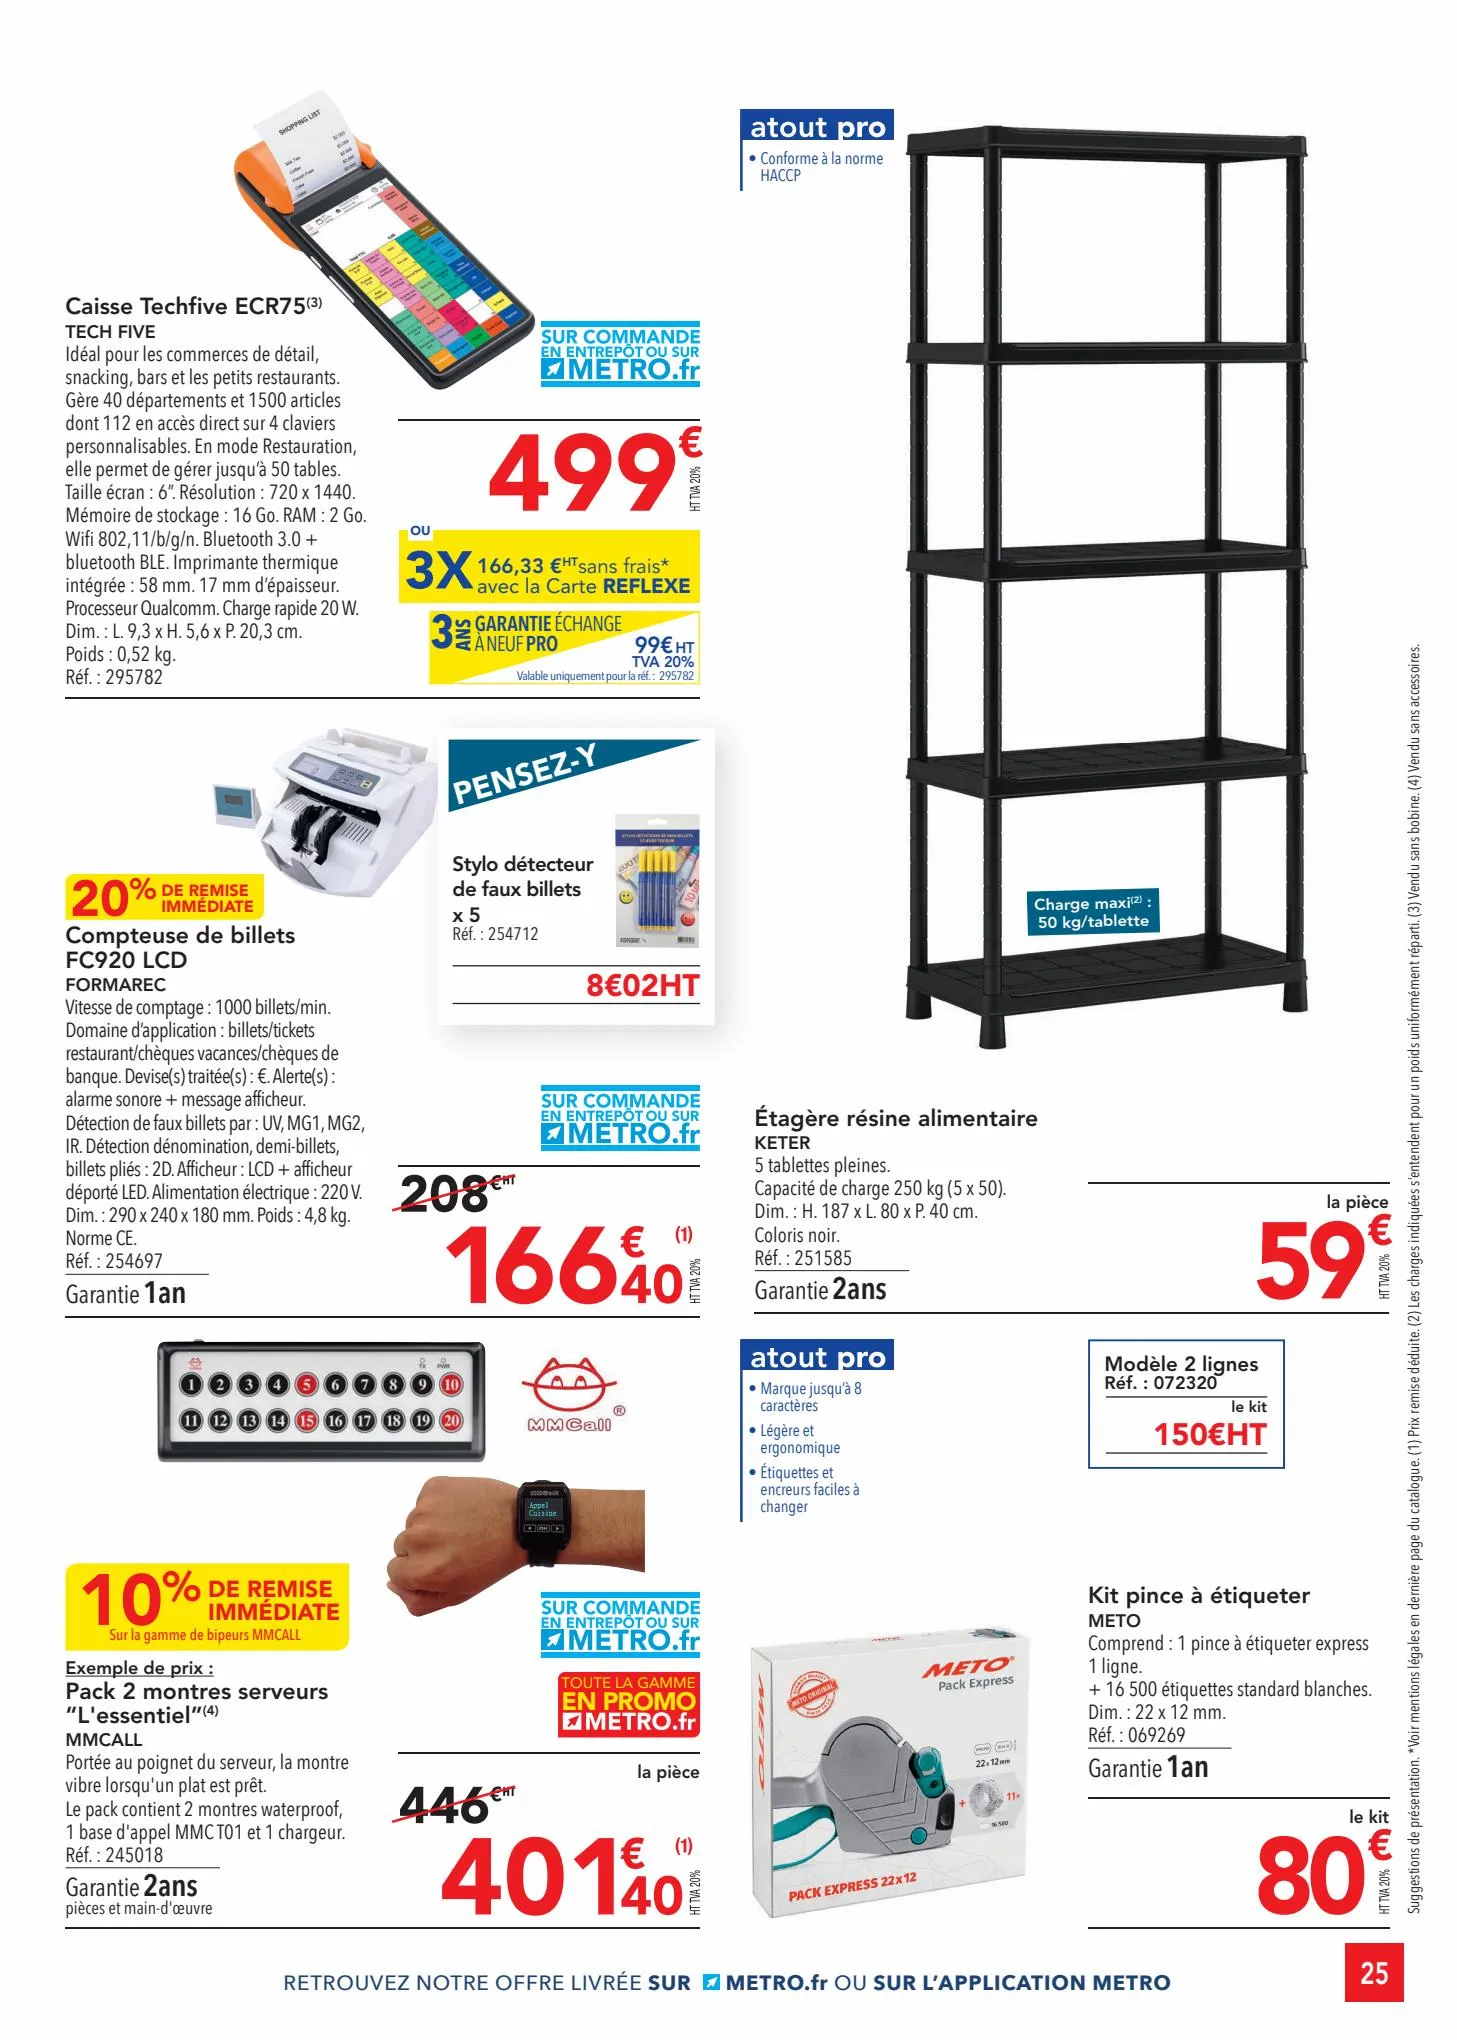 Catalogue Selection Promos Equipement, page 00025